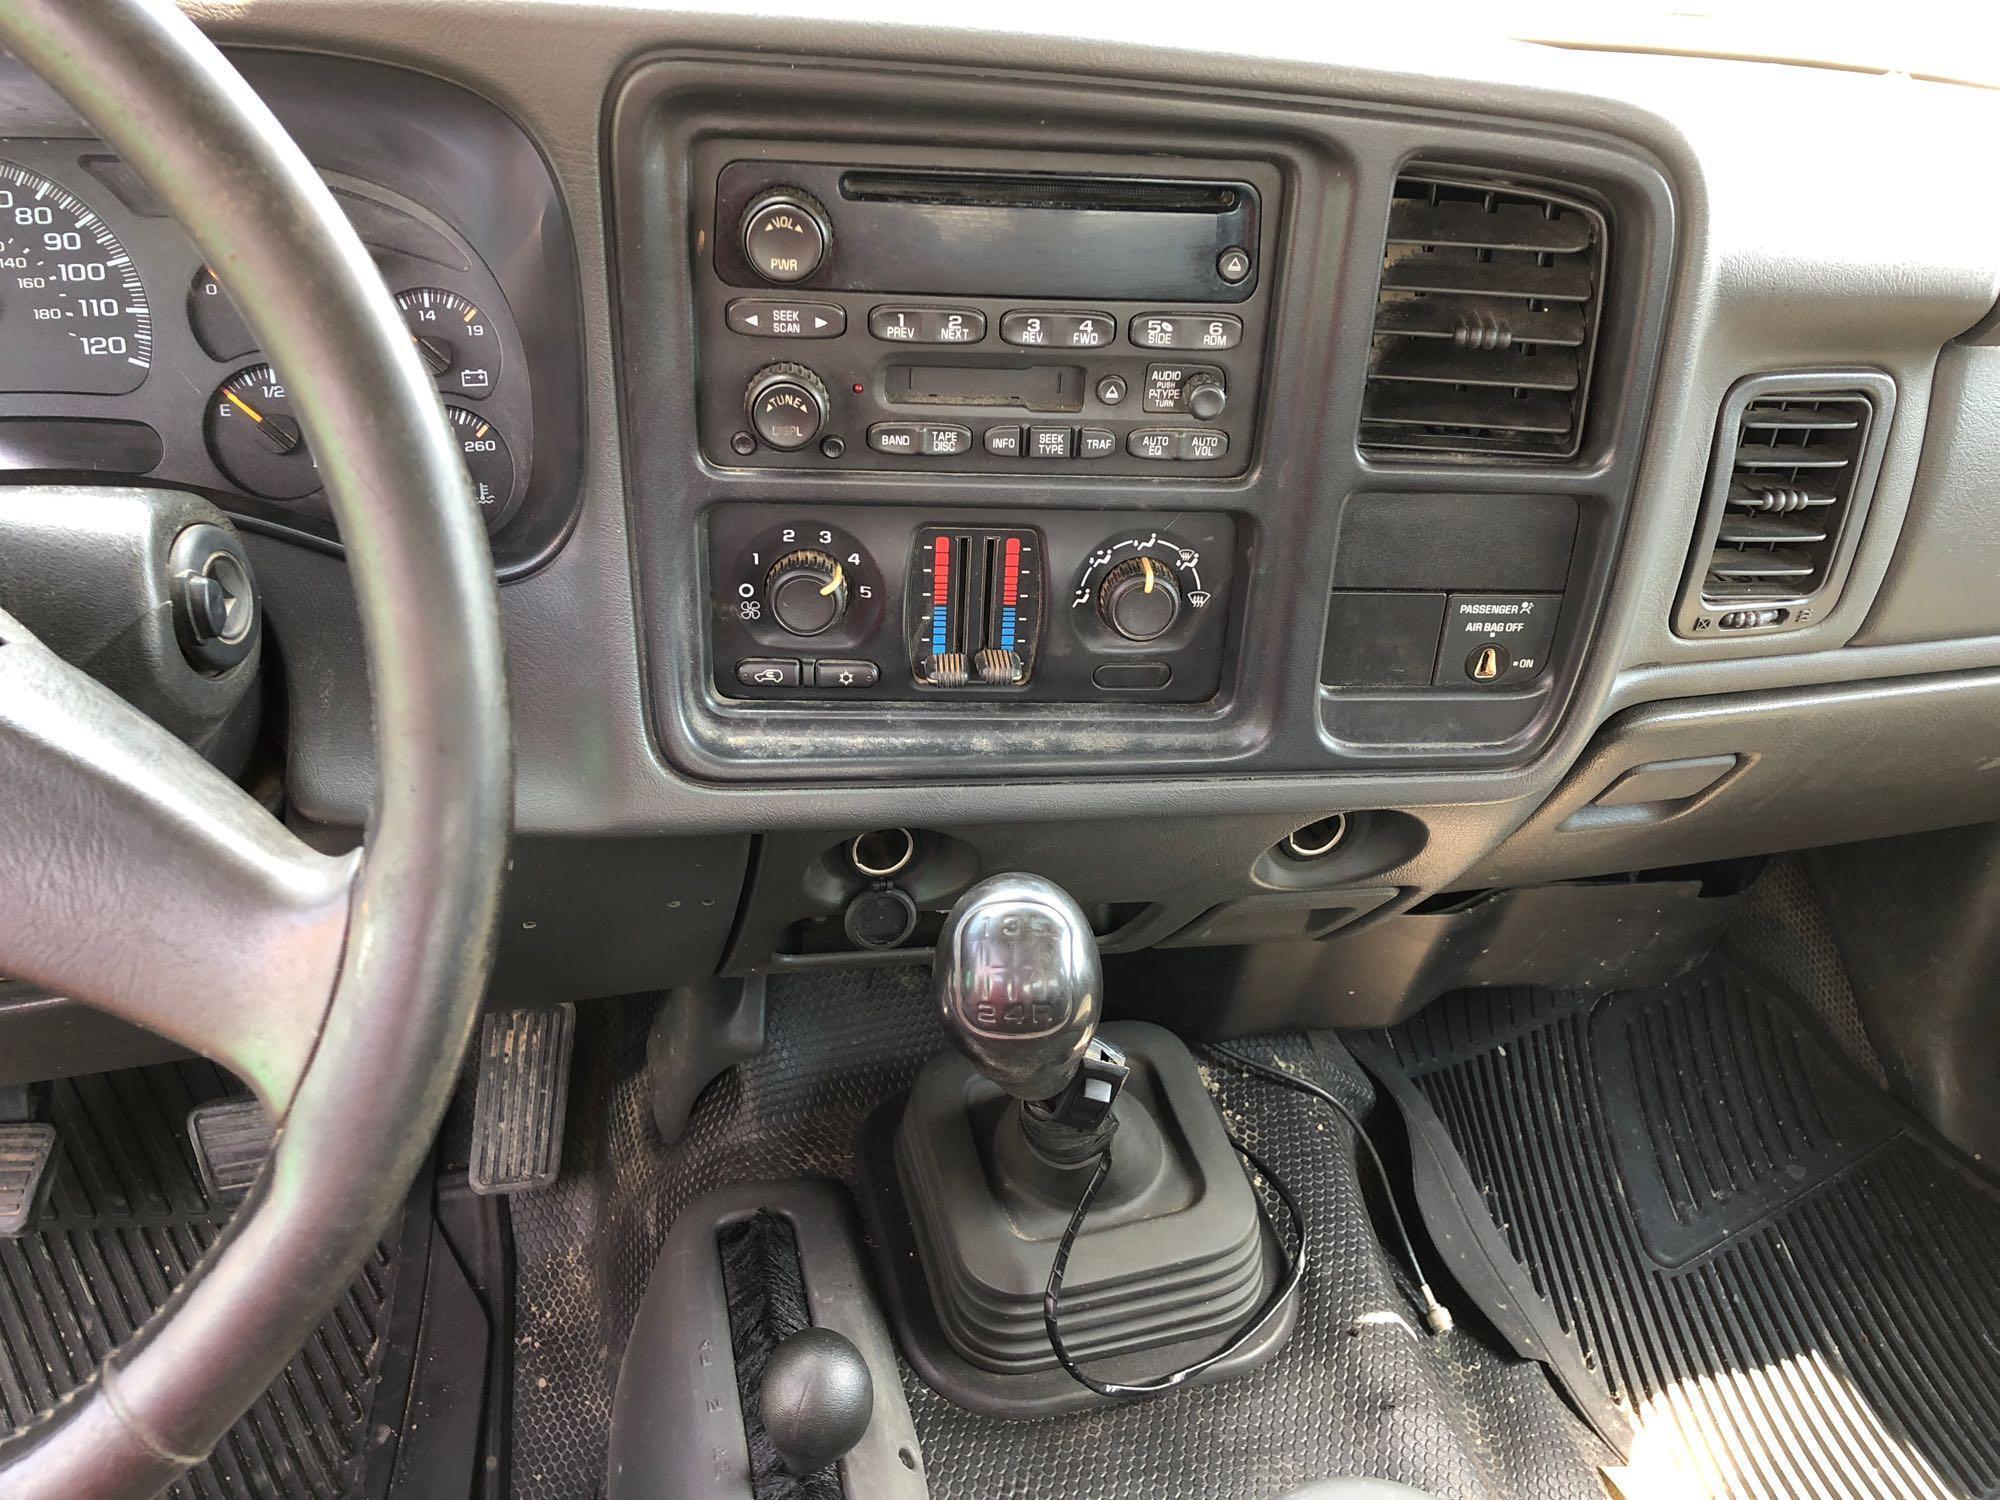 2004 CHEVY 3500, EXTENDED CAB